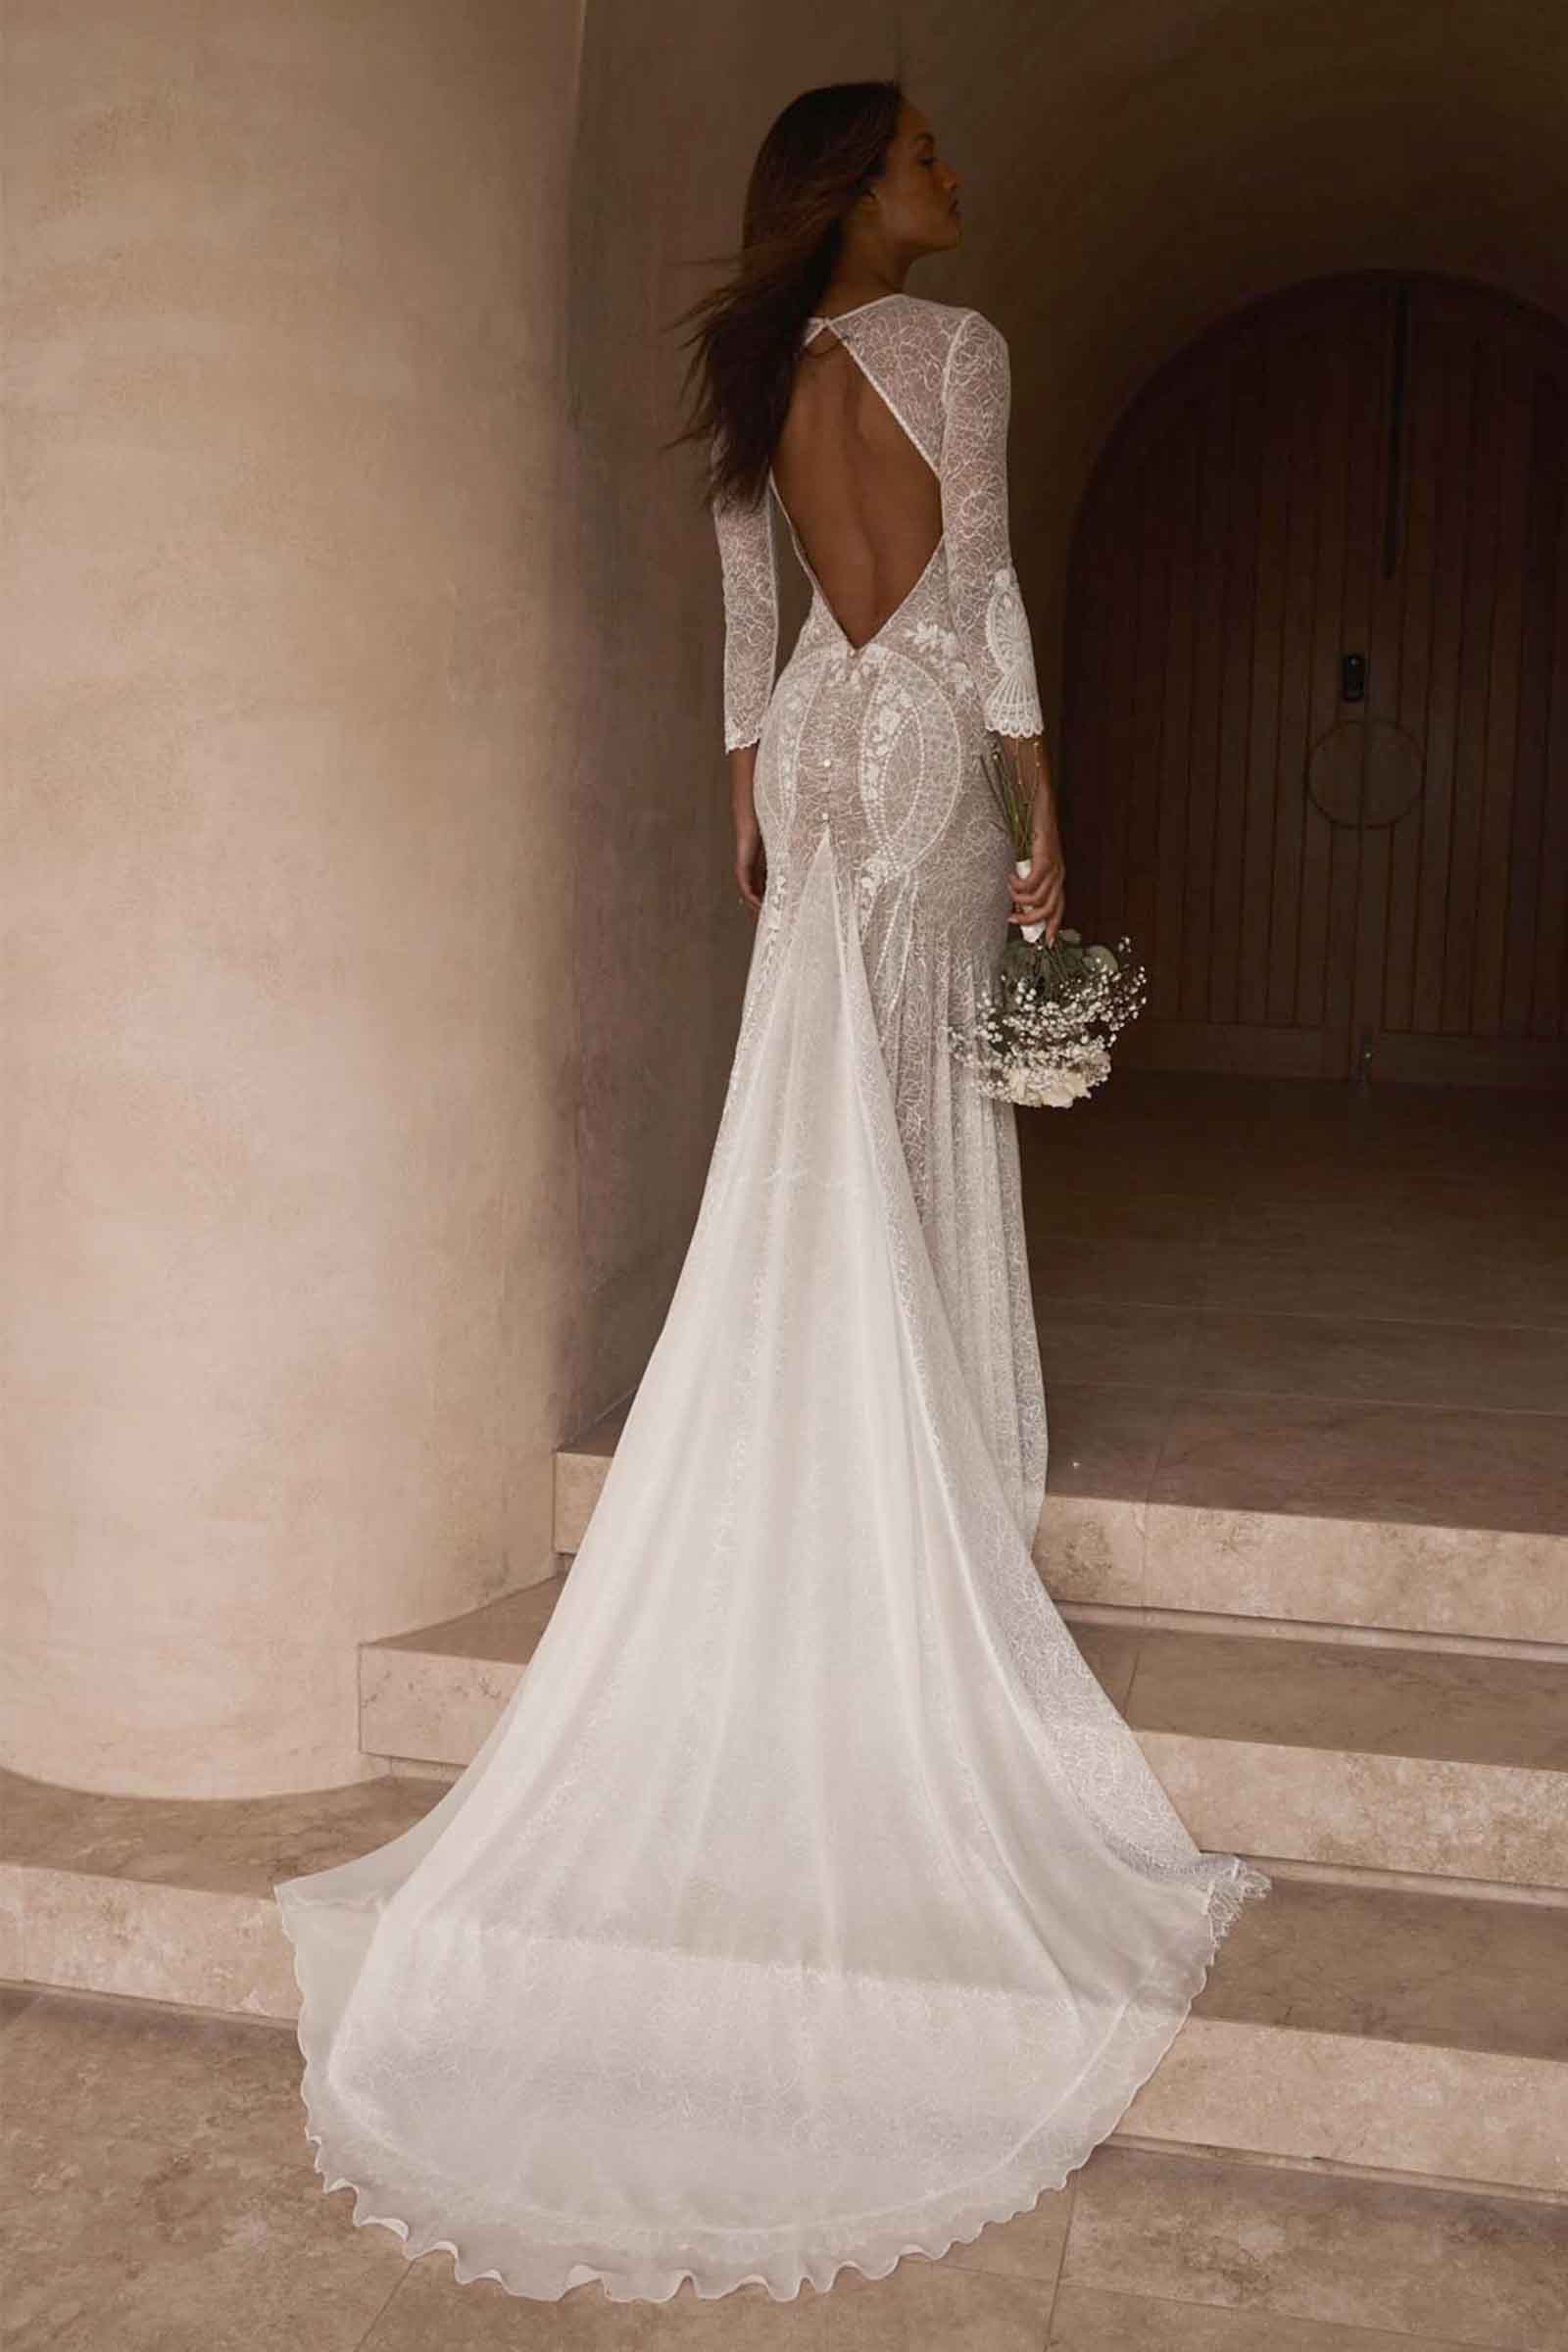 Buy wedding dresses online Welcome - Fifi's Bridal Boutique - 5 stars